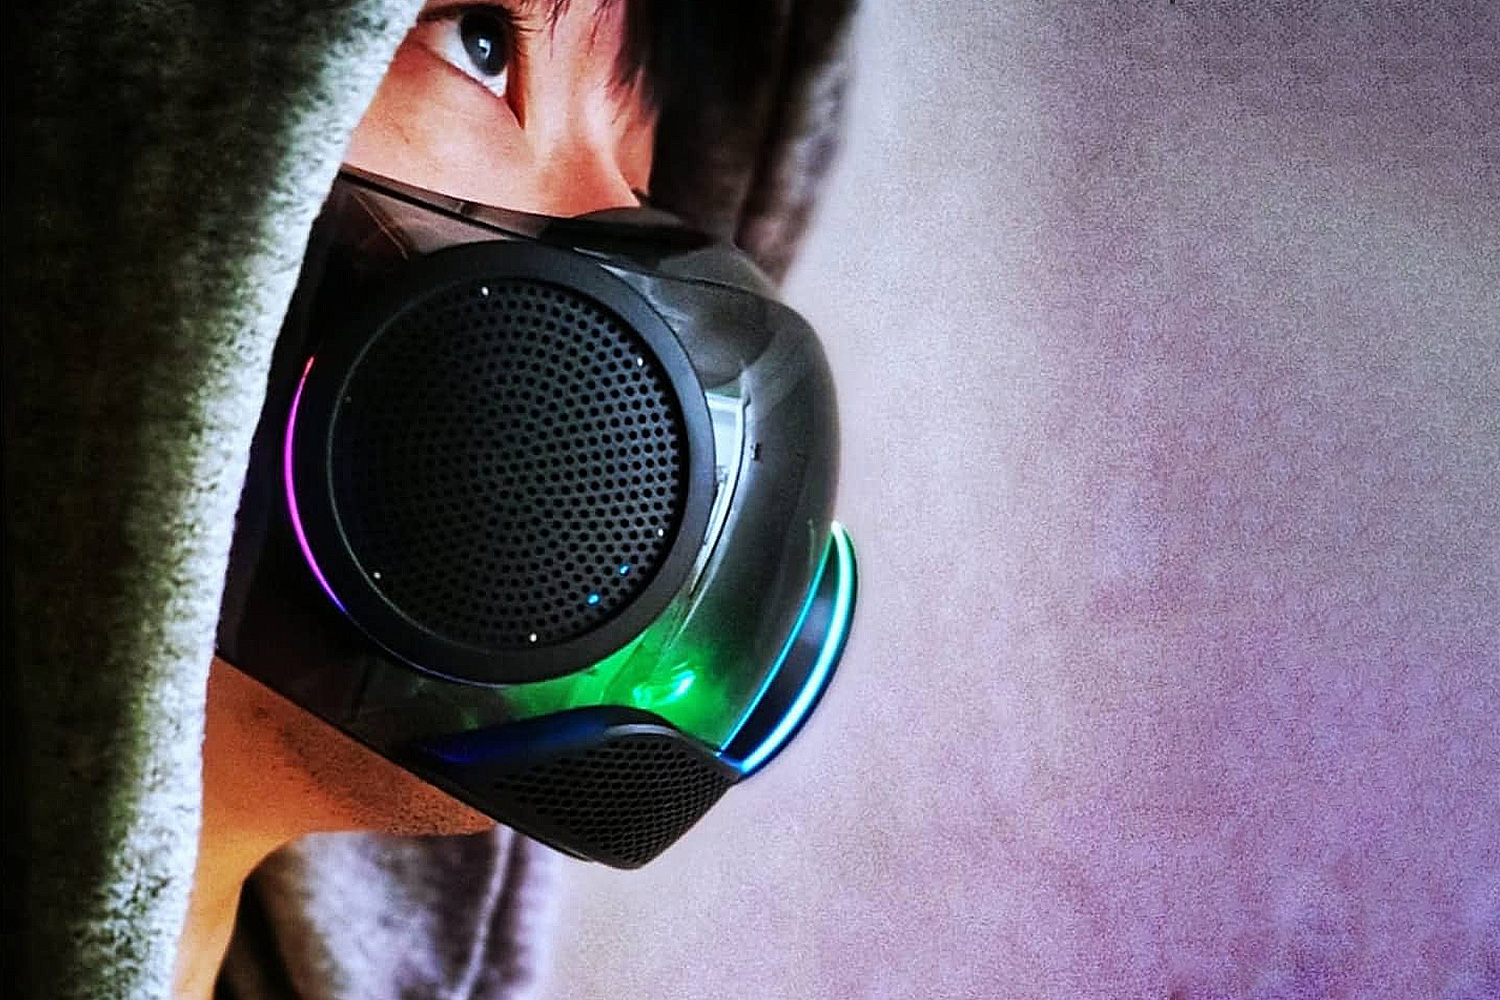 Razer launches Zephyr, an RGB conceal